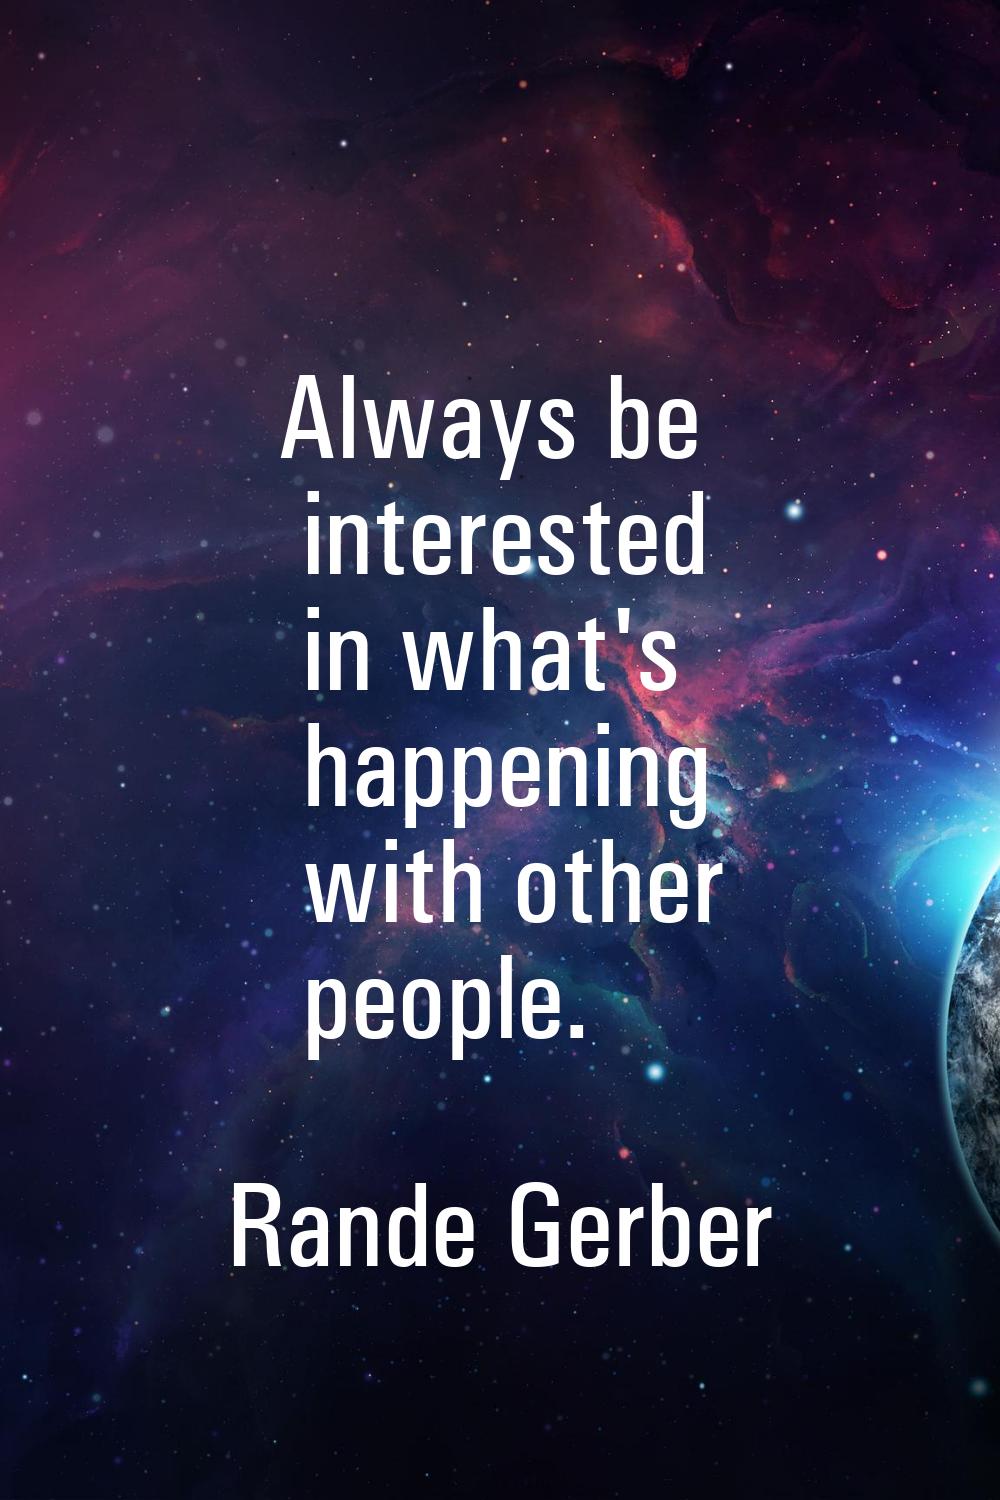 Always be interested in what's happening with other people.